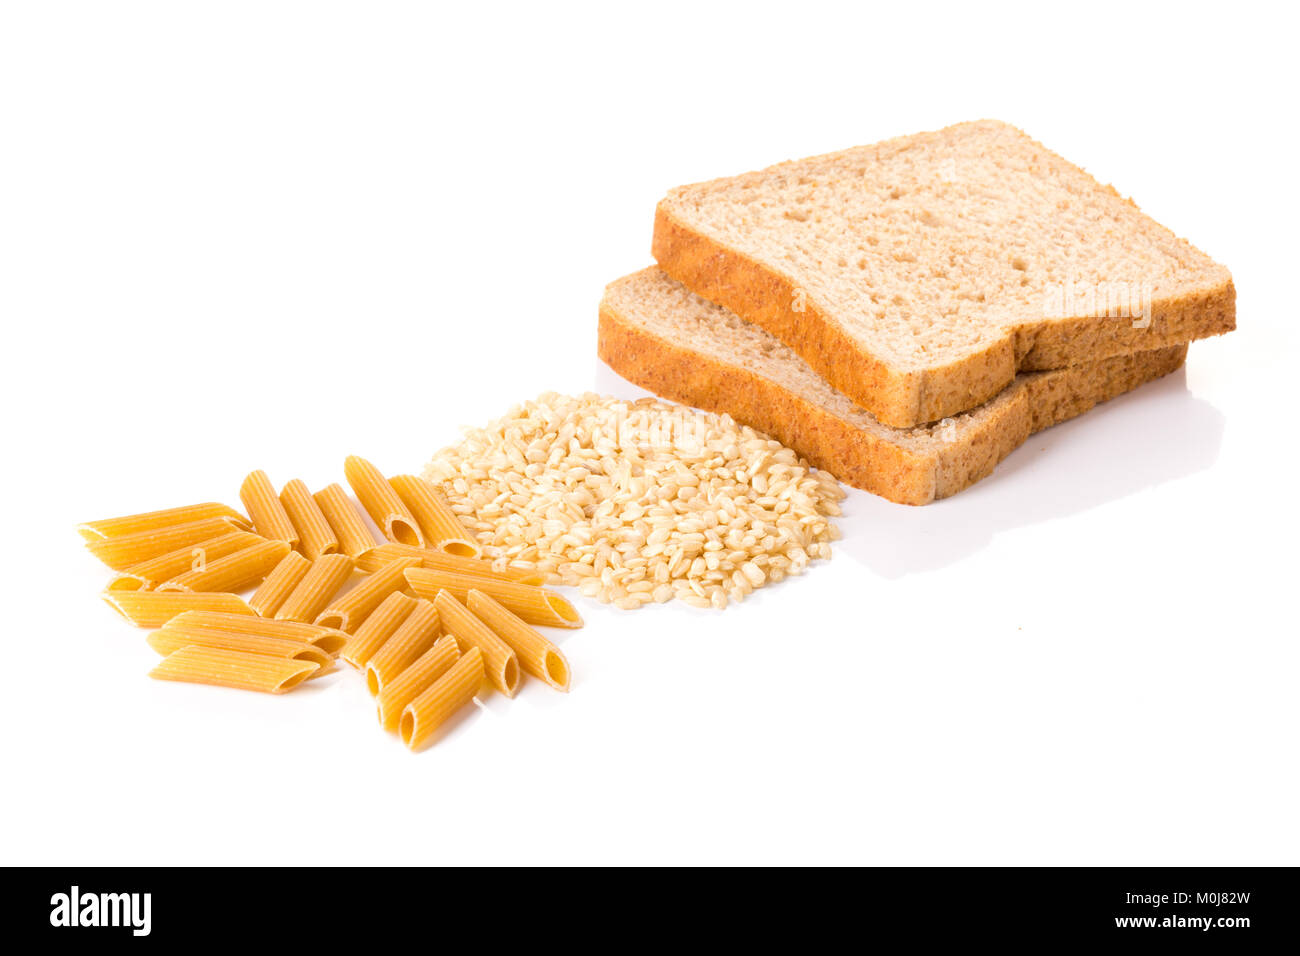 Carbohydrate pasta, rice and wholemeal bread on white background Stock Photo